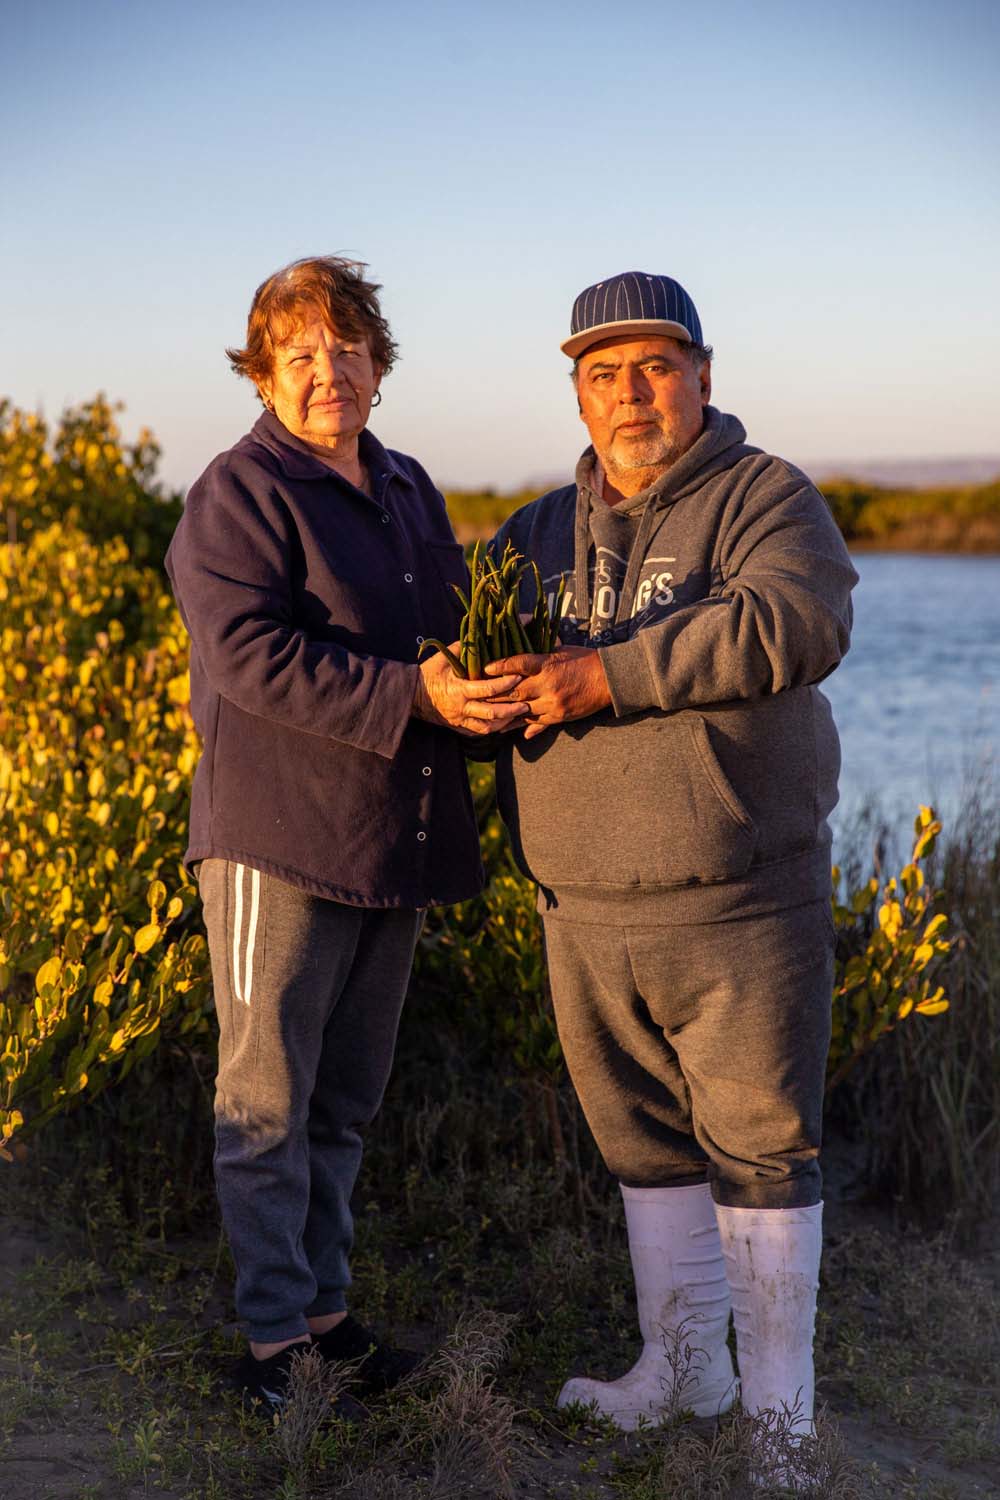 Two people posing for the camera, outdoors, holding mangrove propagules